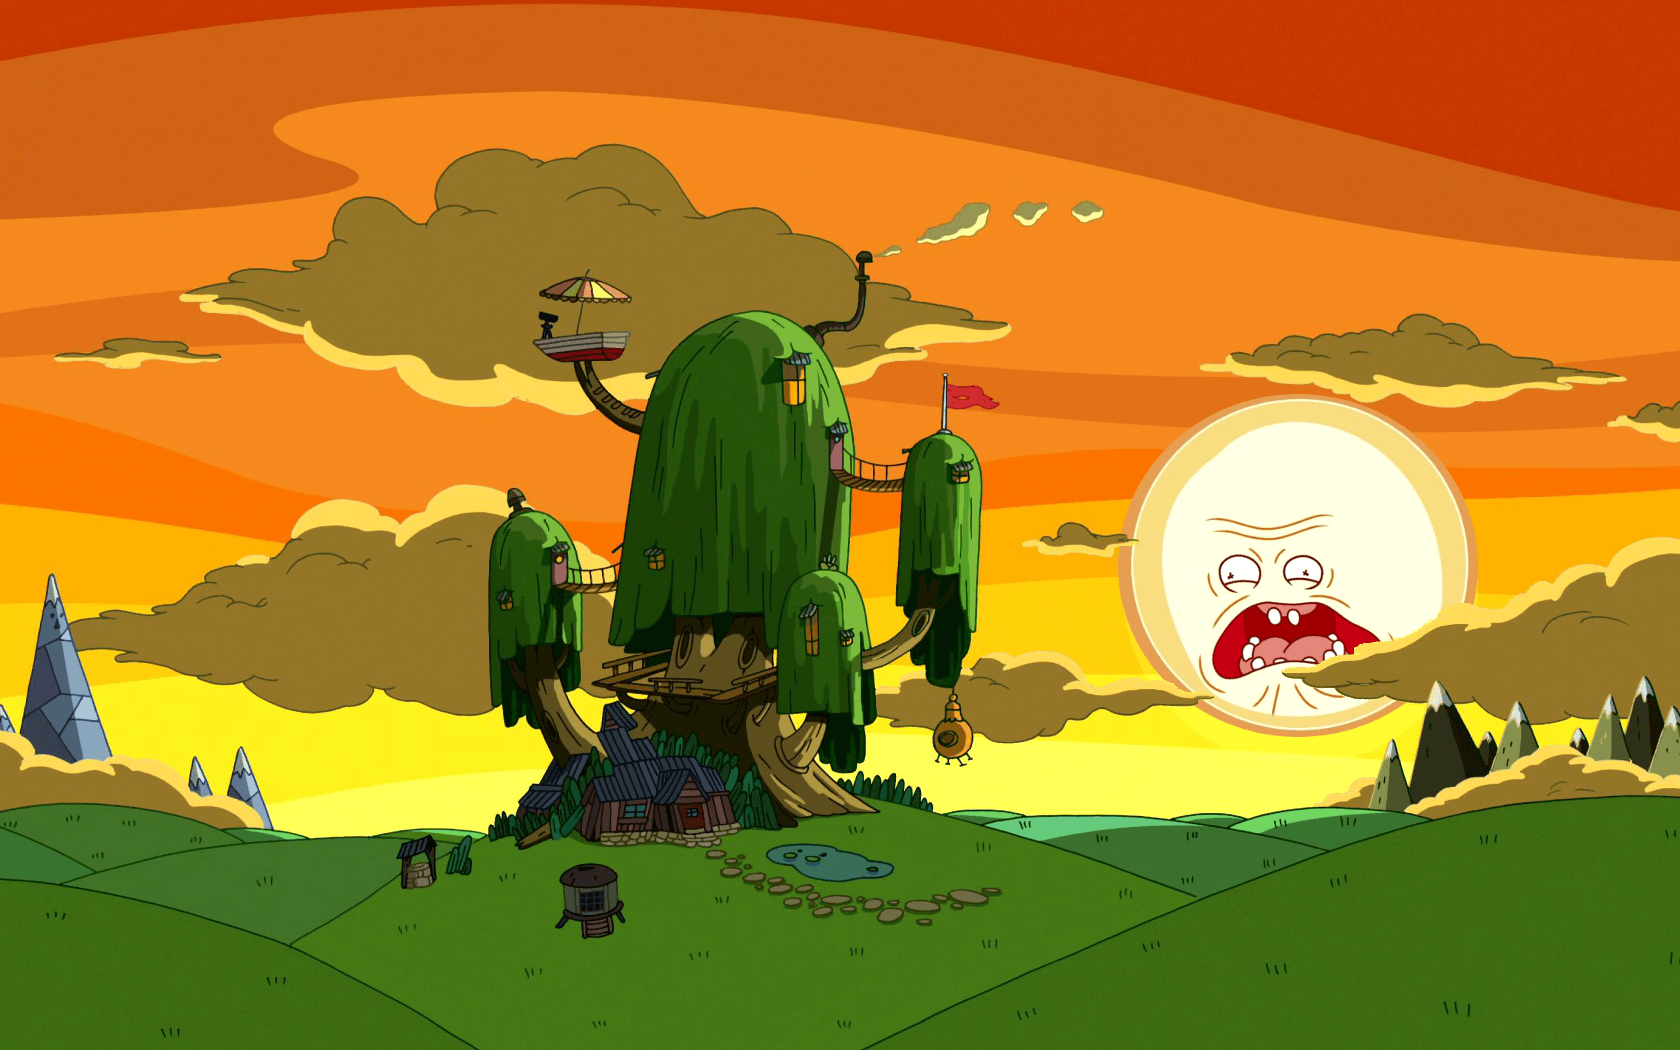 I Made A Rick And Morty Adventure Time Wallpaper For Those Who Are